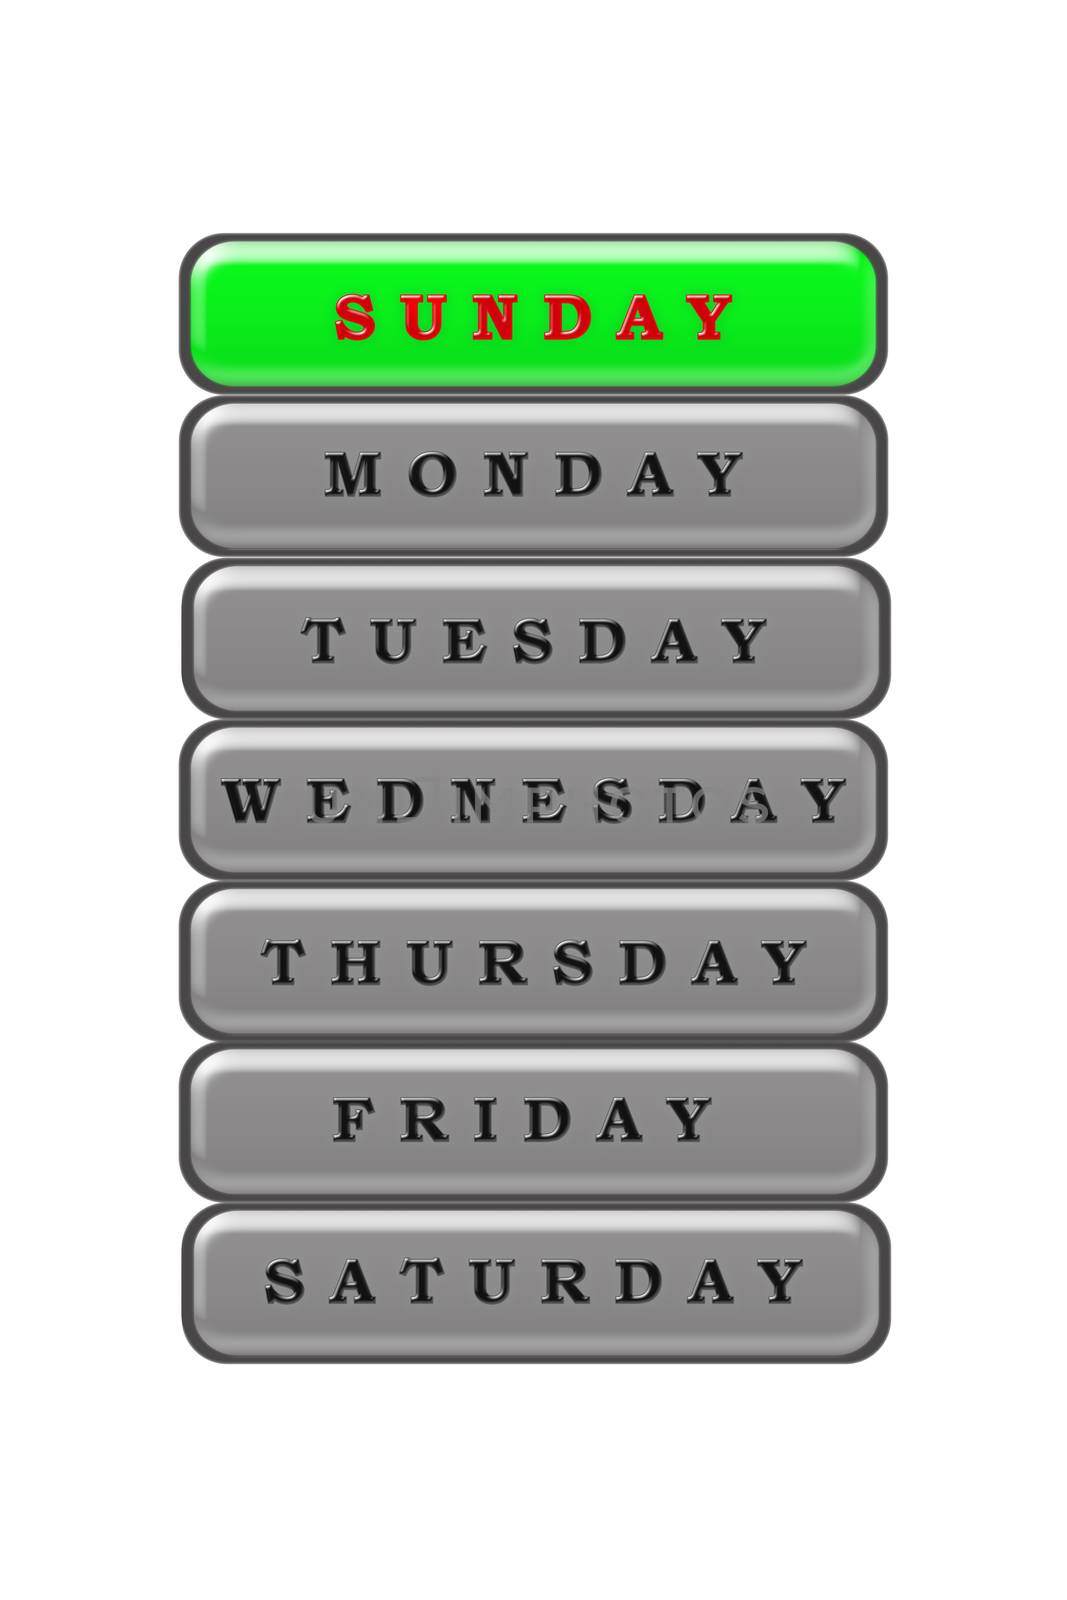 Among the list of days of the week, Sunday is highlighted in red on a green background.